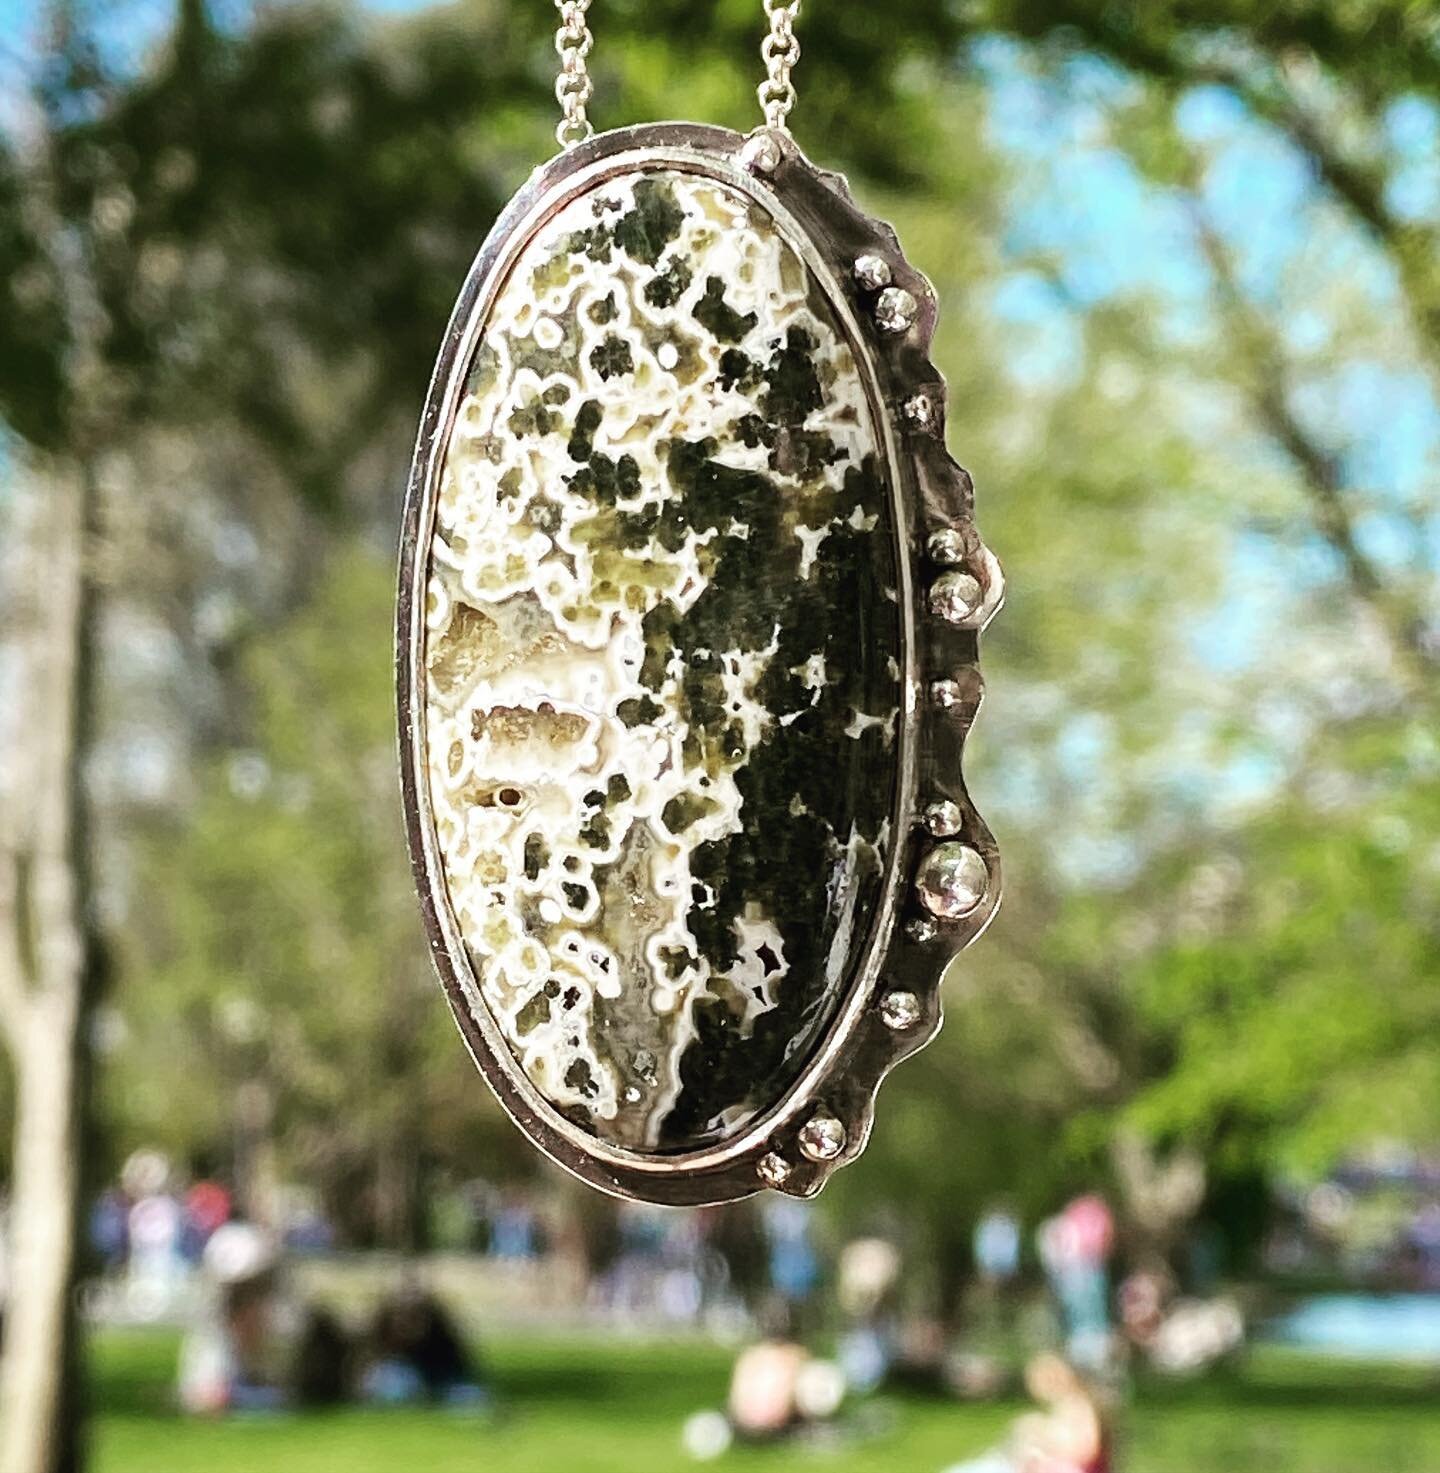 What a beautiful start to the outdoor market season in a stunning location!! And just about every human being was outside on this glorious Saturday. Want to see this ocean Jasper beauty up close? There&rsquo;s still time&mdash;we&rsquo;re here til 6p